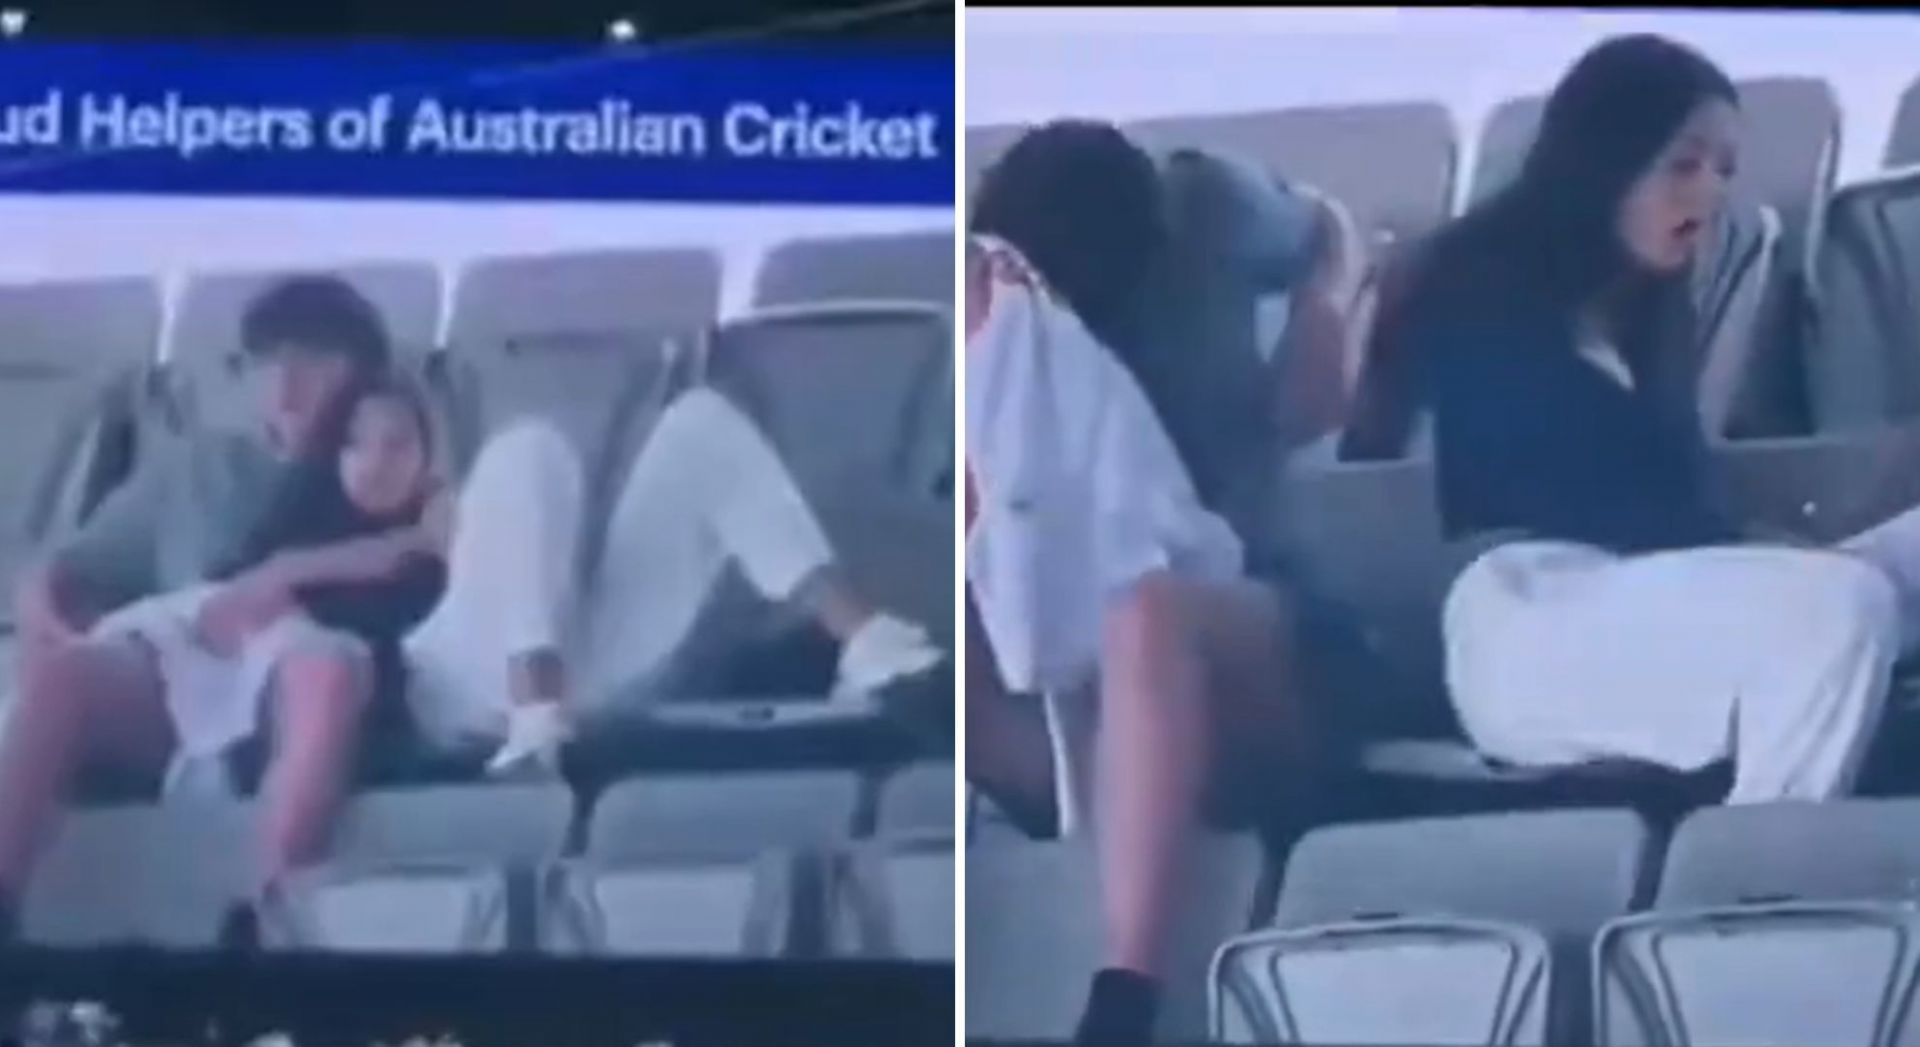 A cuddling couple caught on the big screen on Day 3 of AUS vs PAK second Test at MCG.